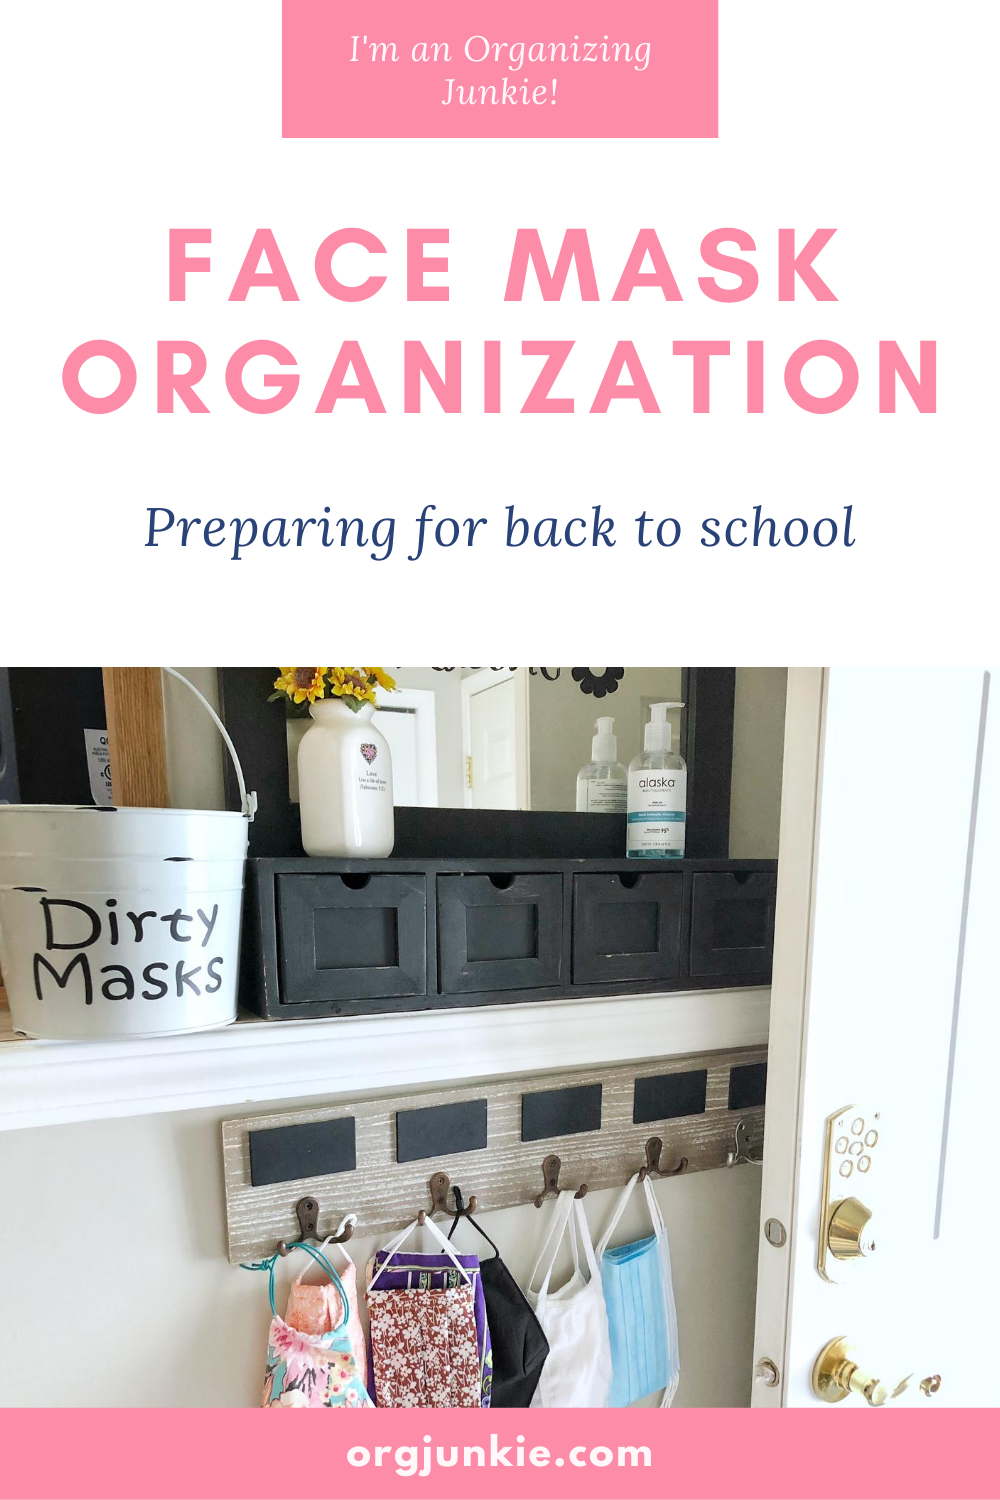 Preparing for Back to School ~ Face Mask Organization at I'm an Organizing Junkie blog